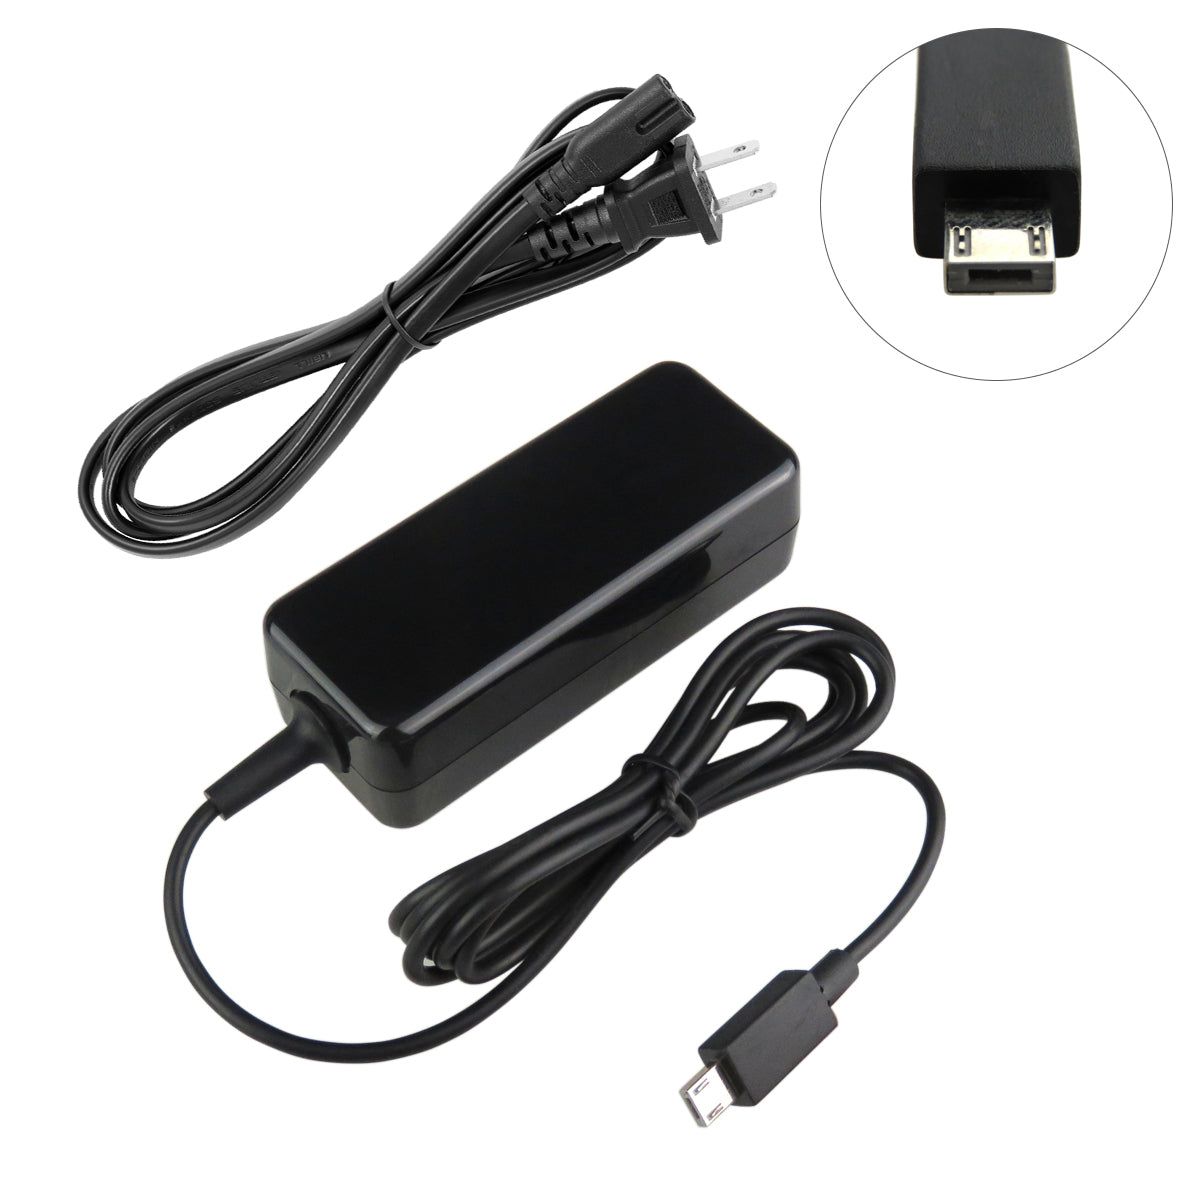 Charger for ASUS C100 Chromebook.